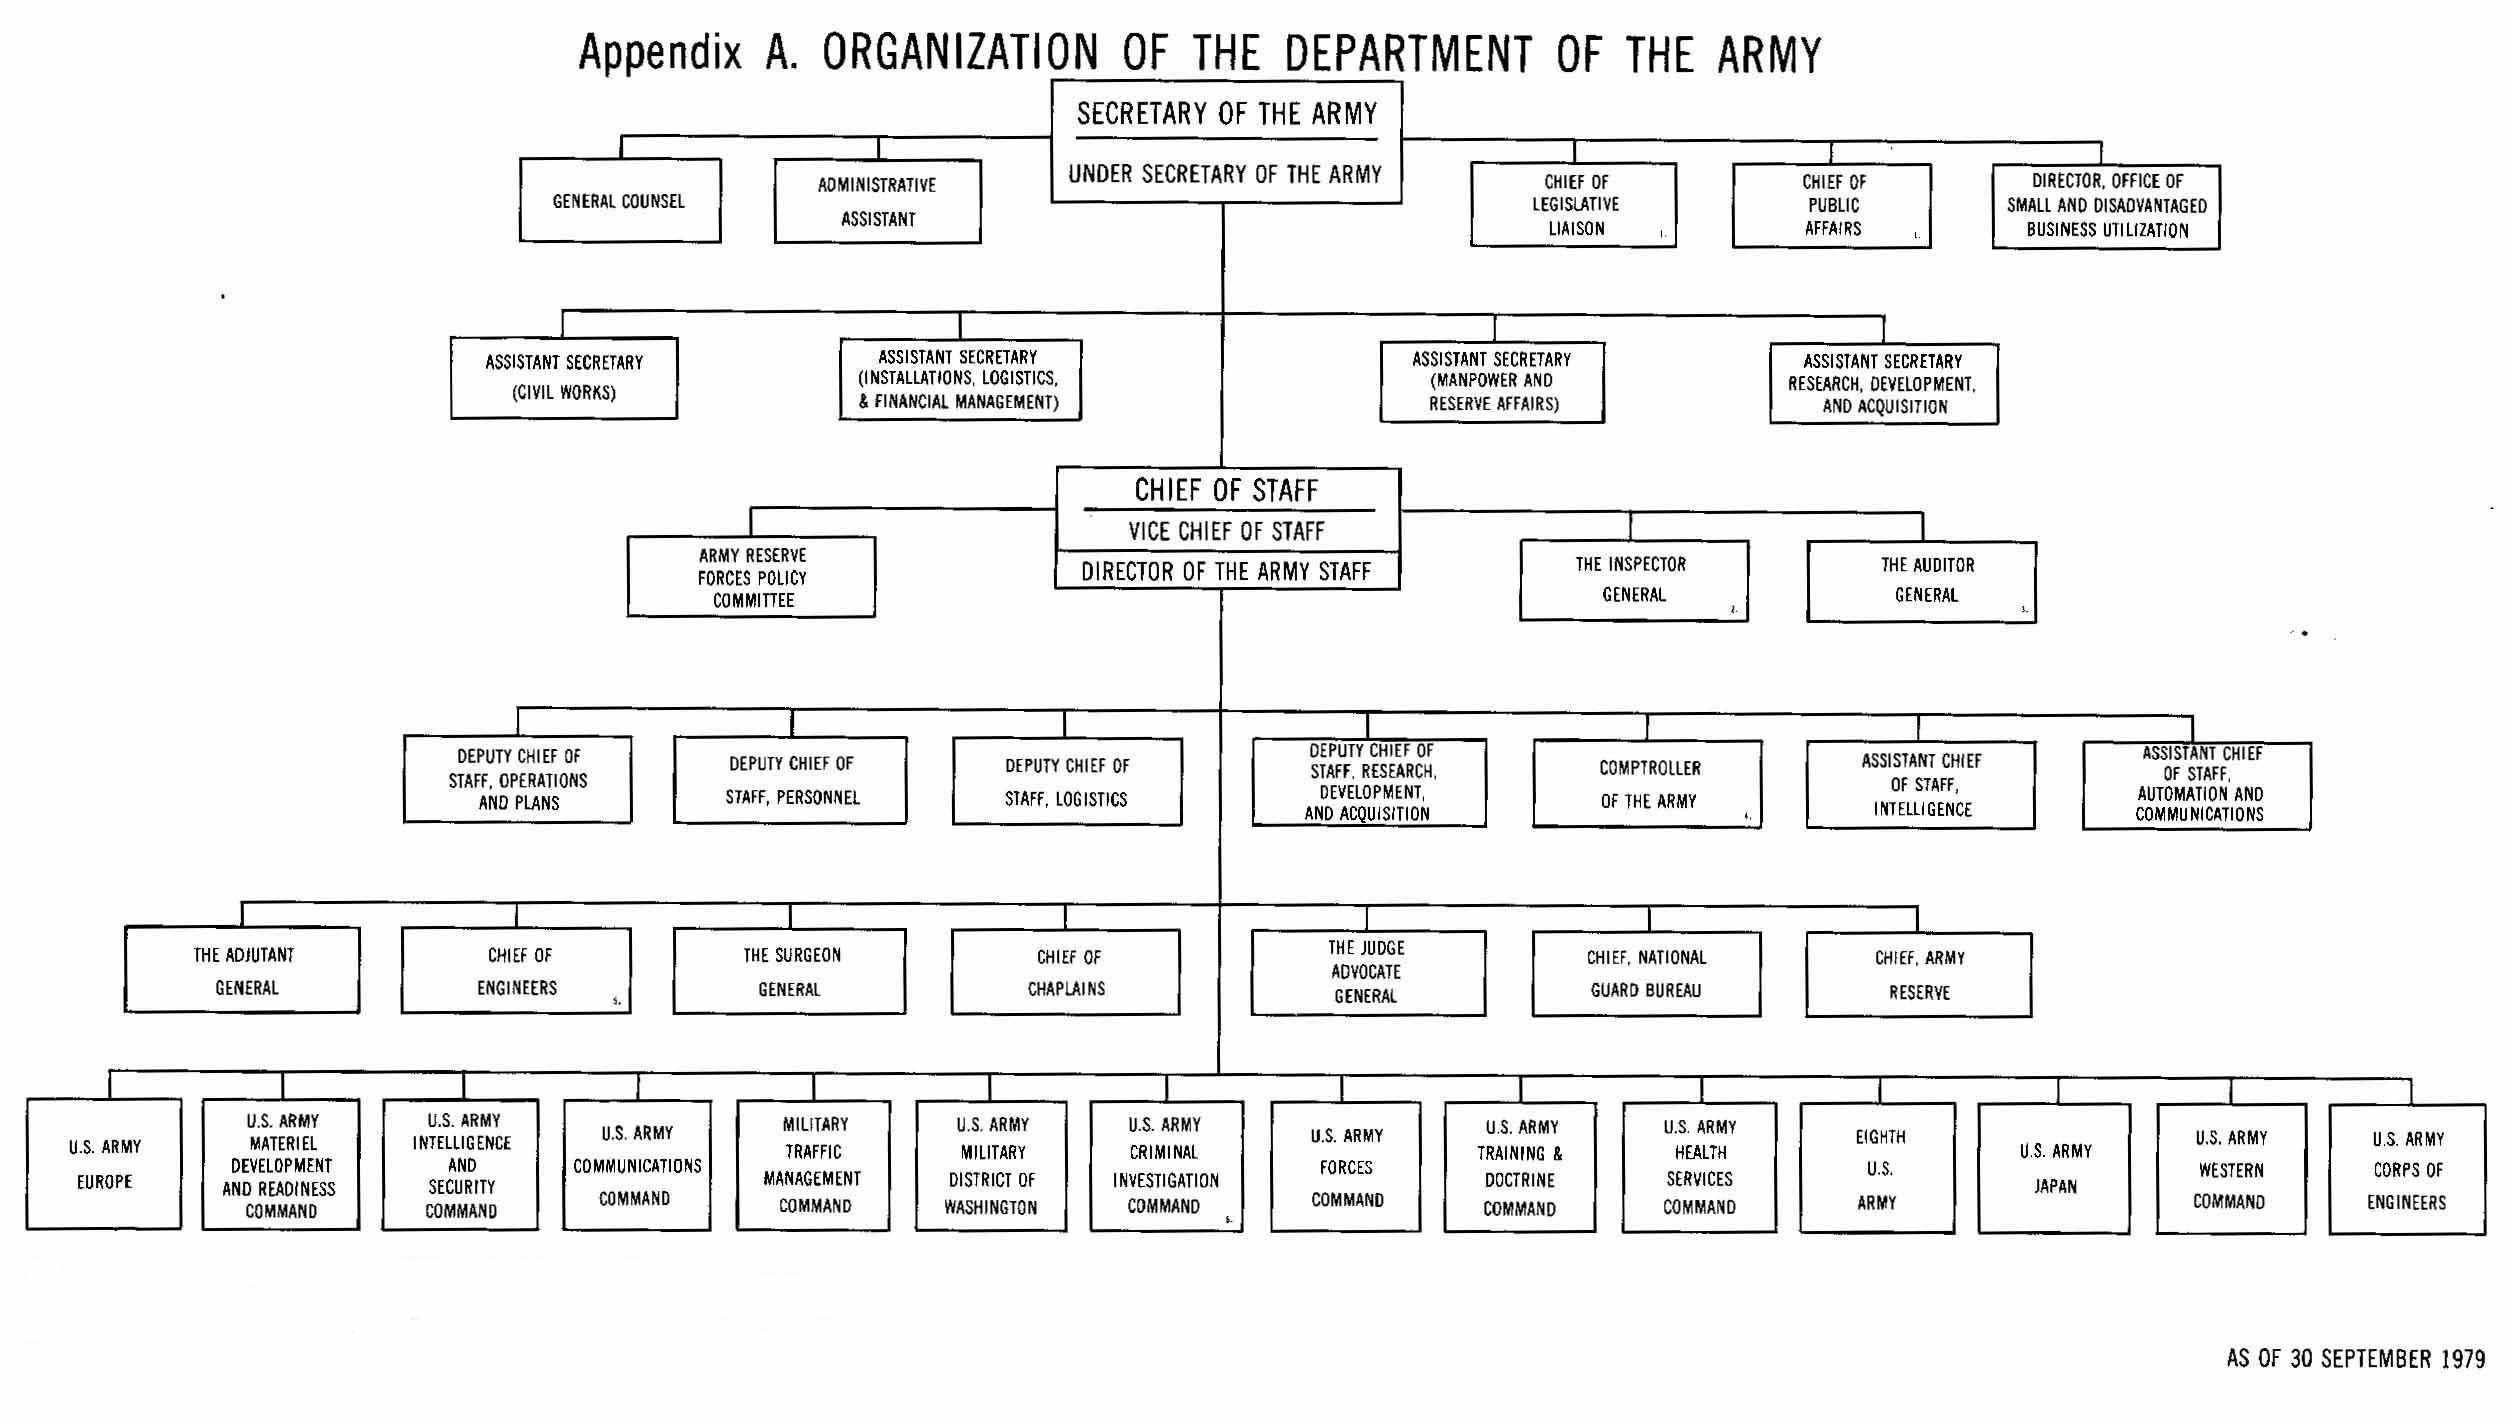 APPENDIX A. Organization of the Department of the Army - 1979 DAHSUM